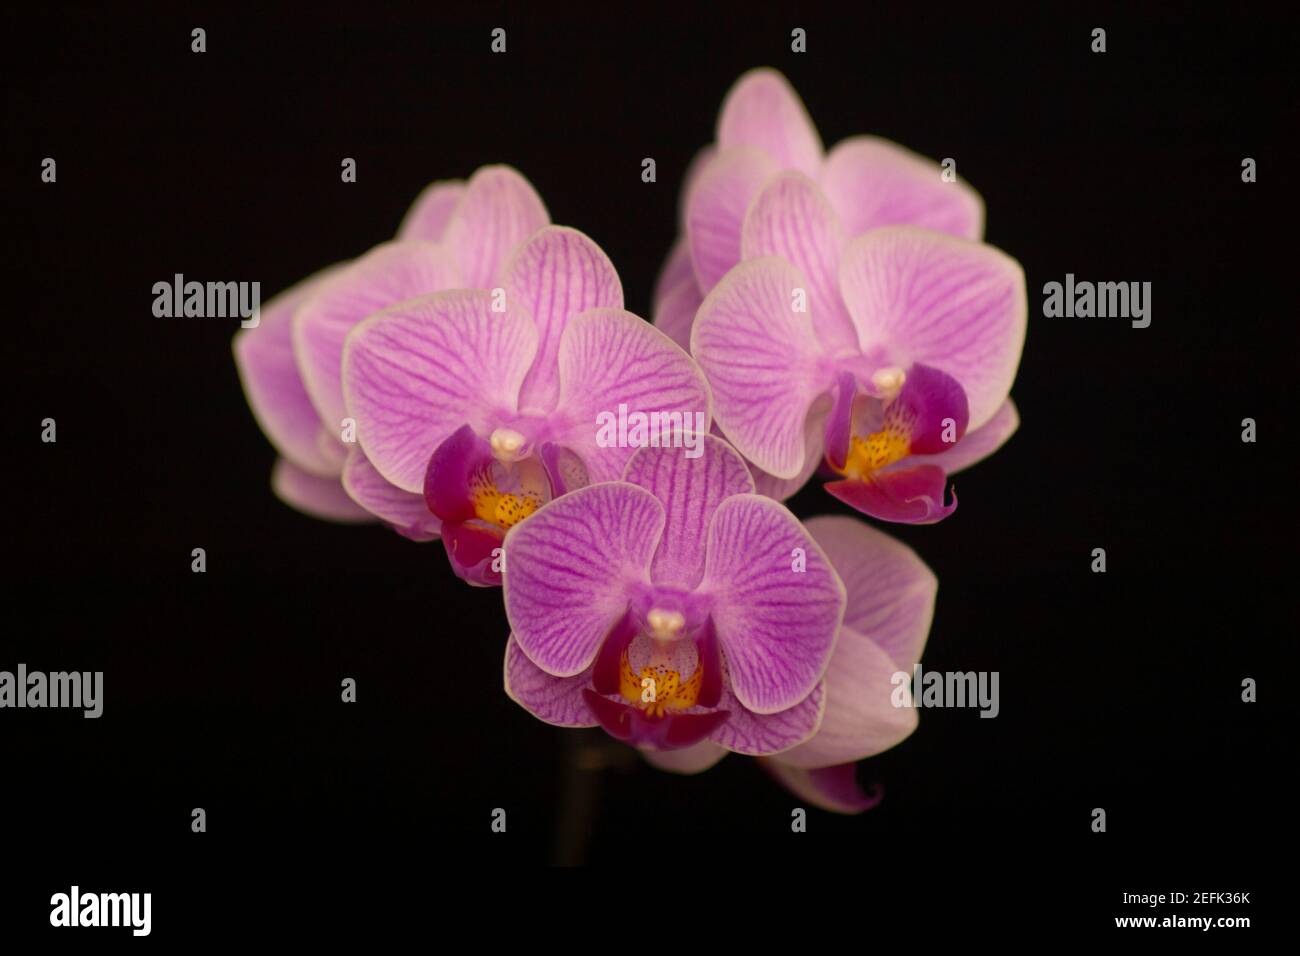 Orchid flowers Phalaenopsis Perceval mini. Branch of flowering Orchid Phalaenopsis Perceval mini (known as butterfly orchids) on a black background Stock Photo